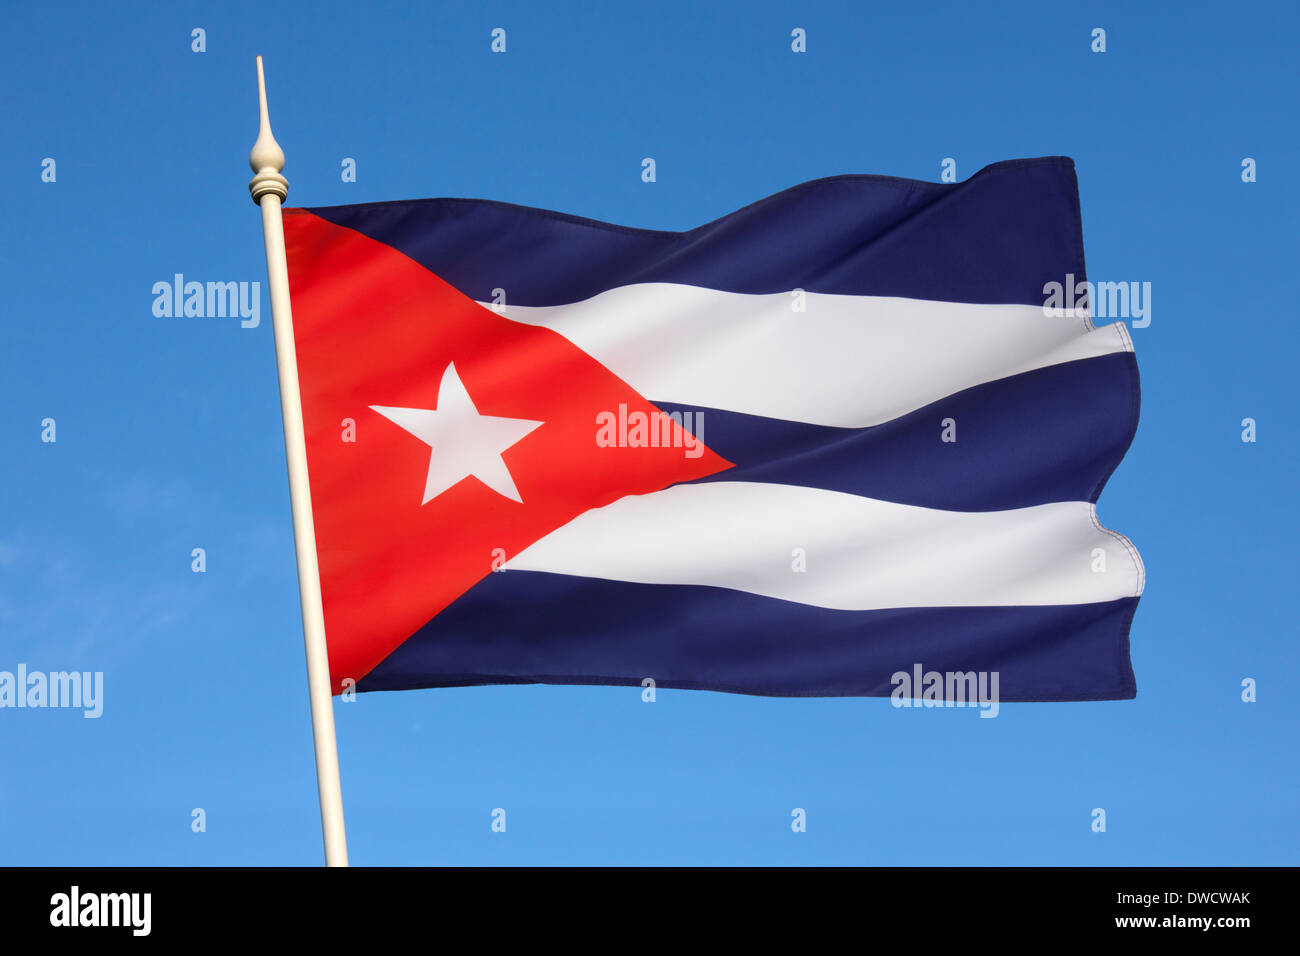 The national flag of Cuba. Stock Photo